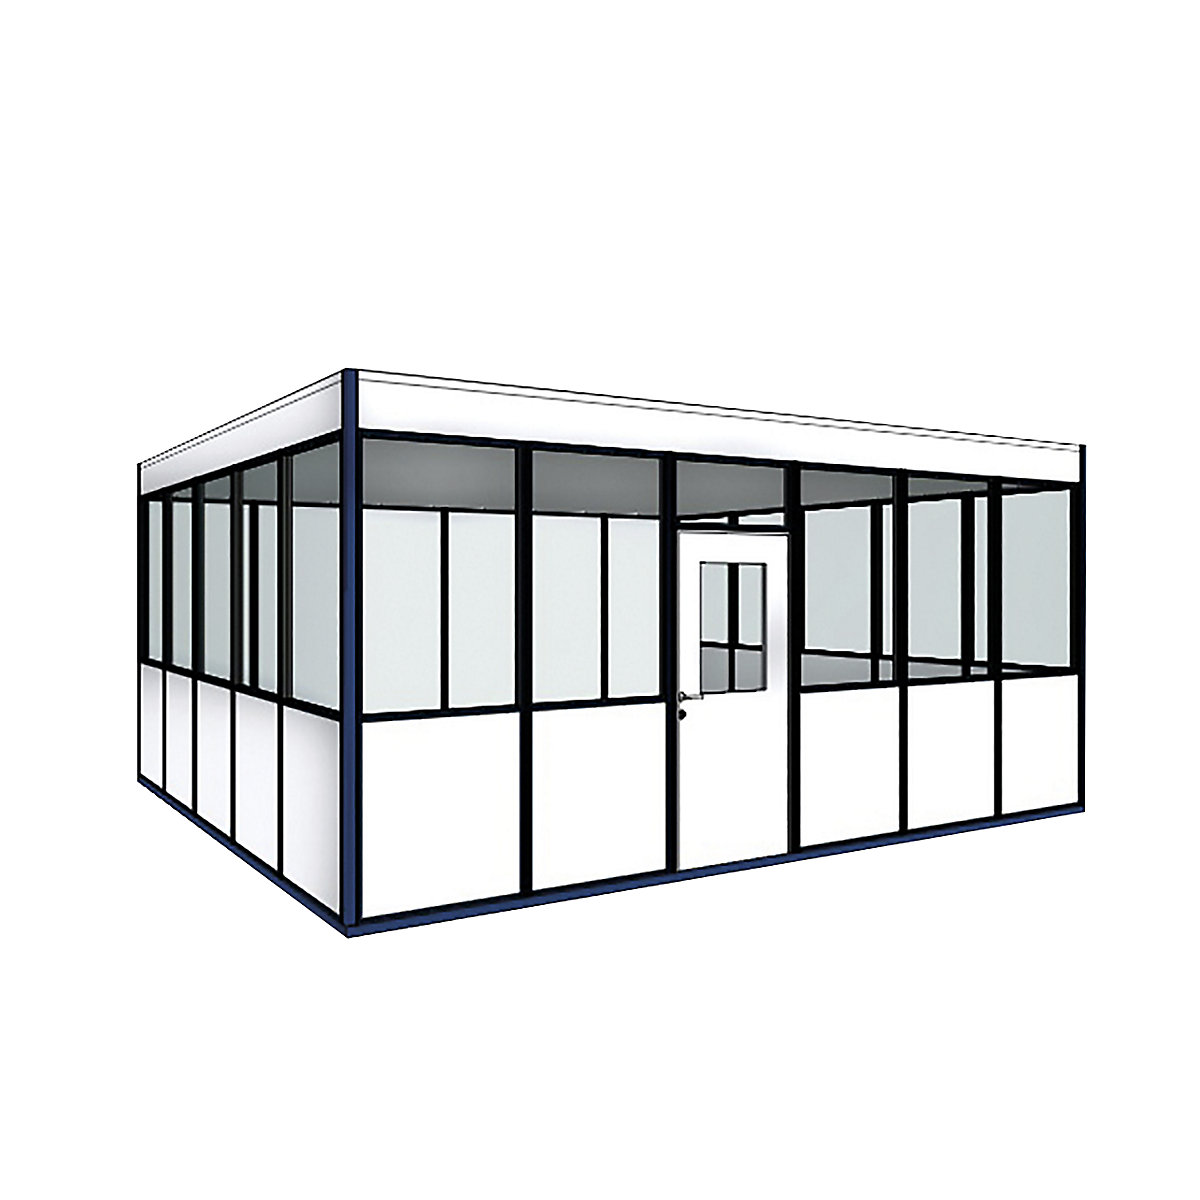 Prefab office, 4-sided, free-standing version